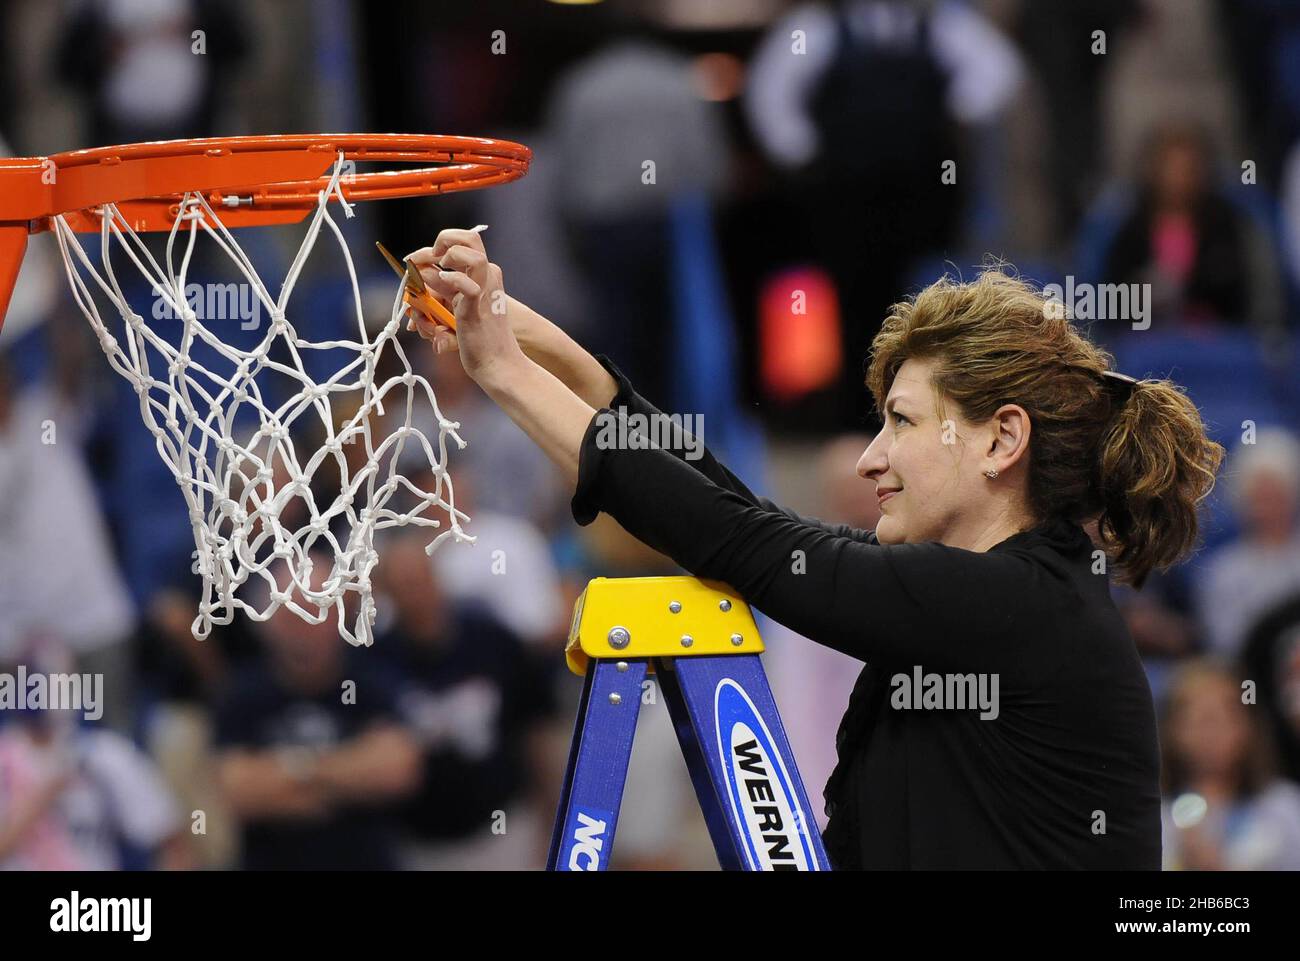 New Orleans, USA. 09th Apr, 2013. University of Connecticut president Susan Herbst cuts down a piece of the net after a 93-60 win against Louisville in the women's NCAA Tournament finals in New Orleans on April 9, 2013. (Photo by Cloe Poisson/Hartford Courant/TNS/Sipa USA) Credit: Sipa USA/Alamy Live News Stock Photo